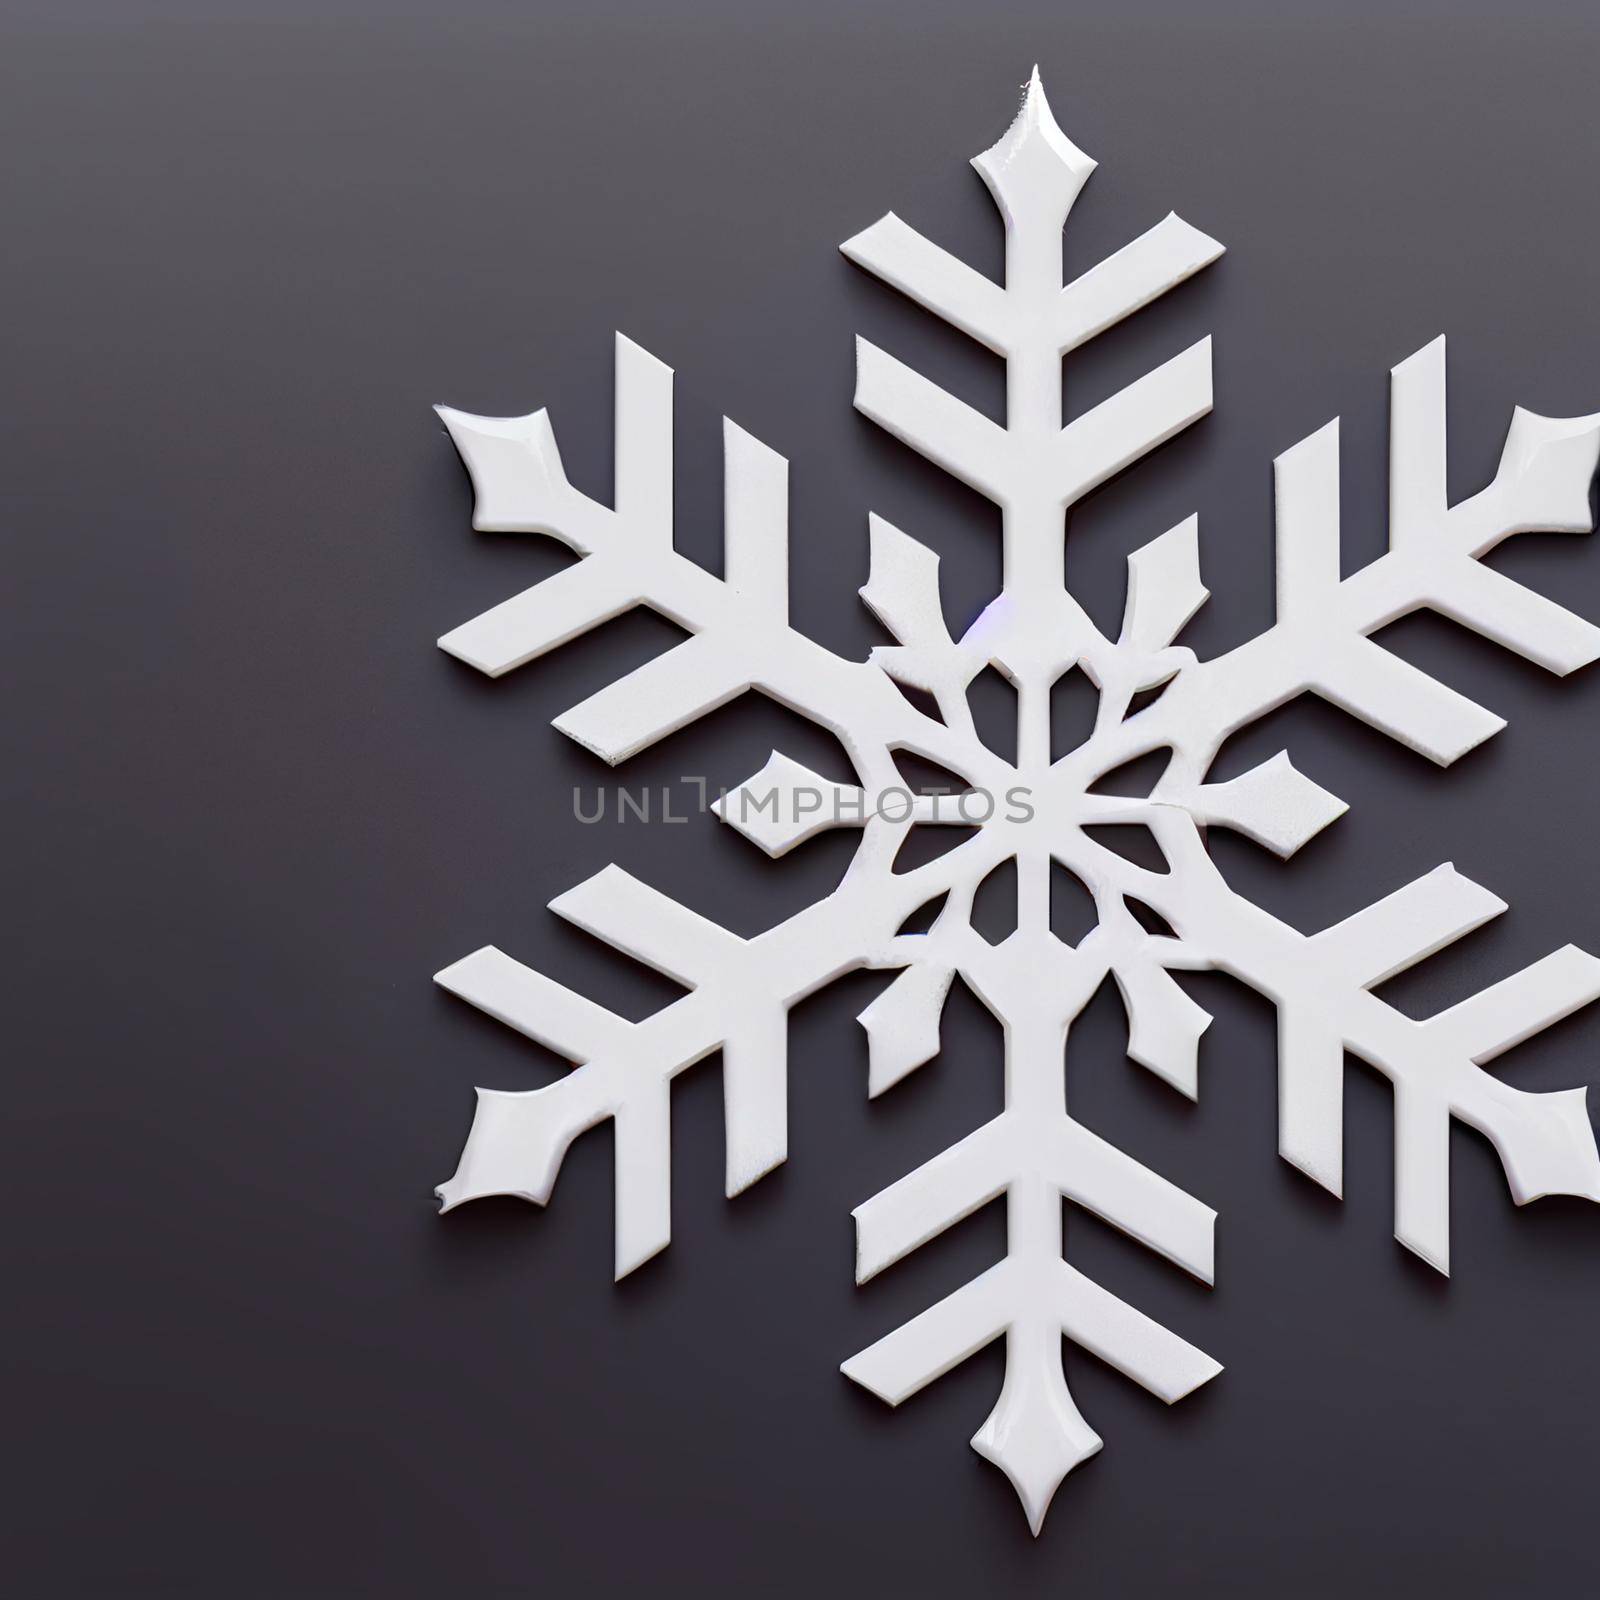 Design image of a snowflake. High quality illustration